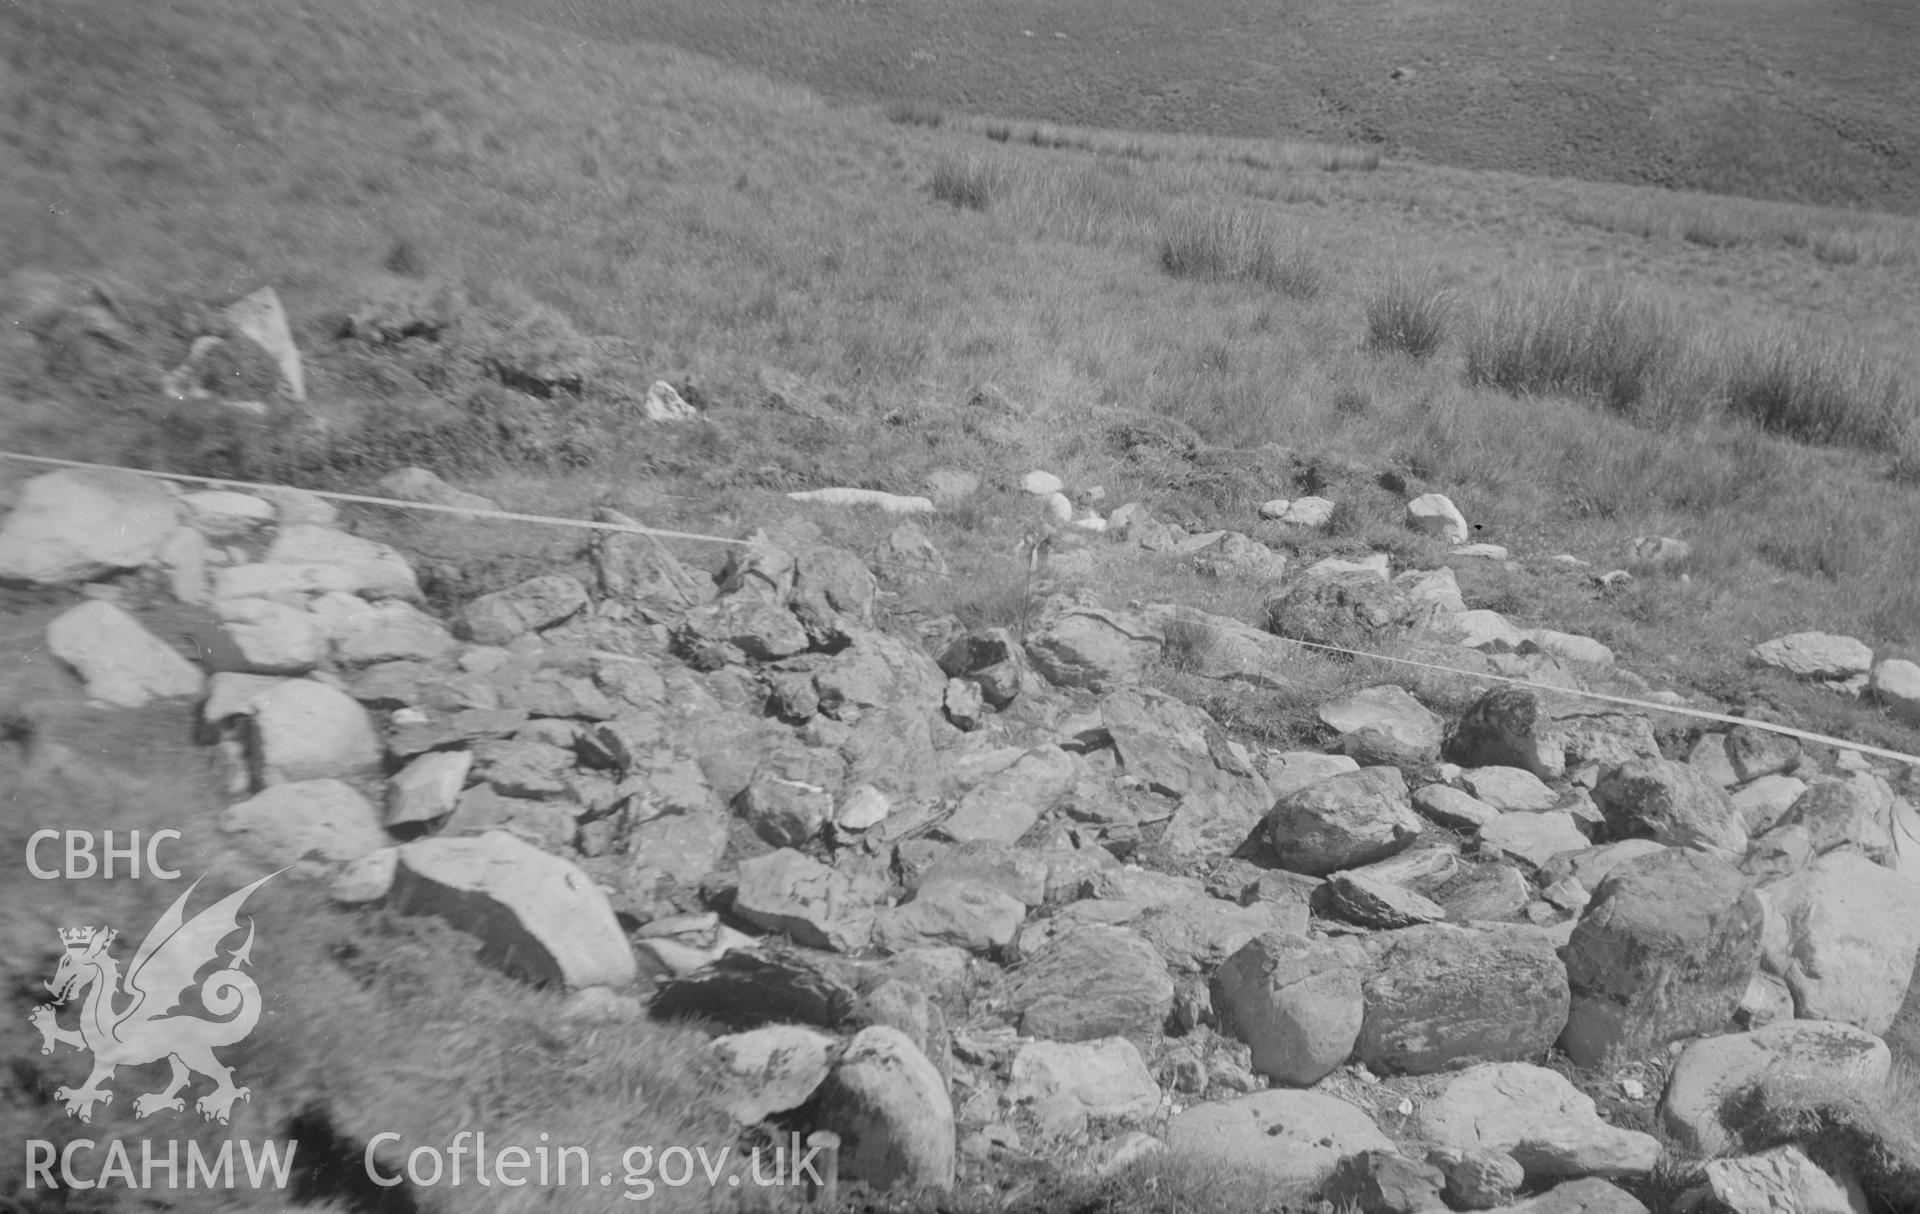 Digital copy of a black and white nitrate negative showing view of the remains of a stove site in a field, unknown location.